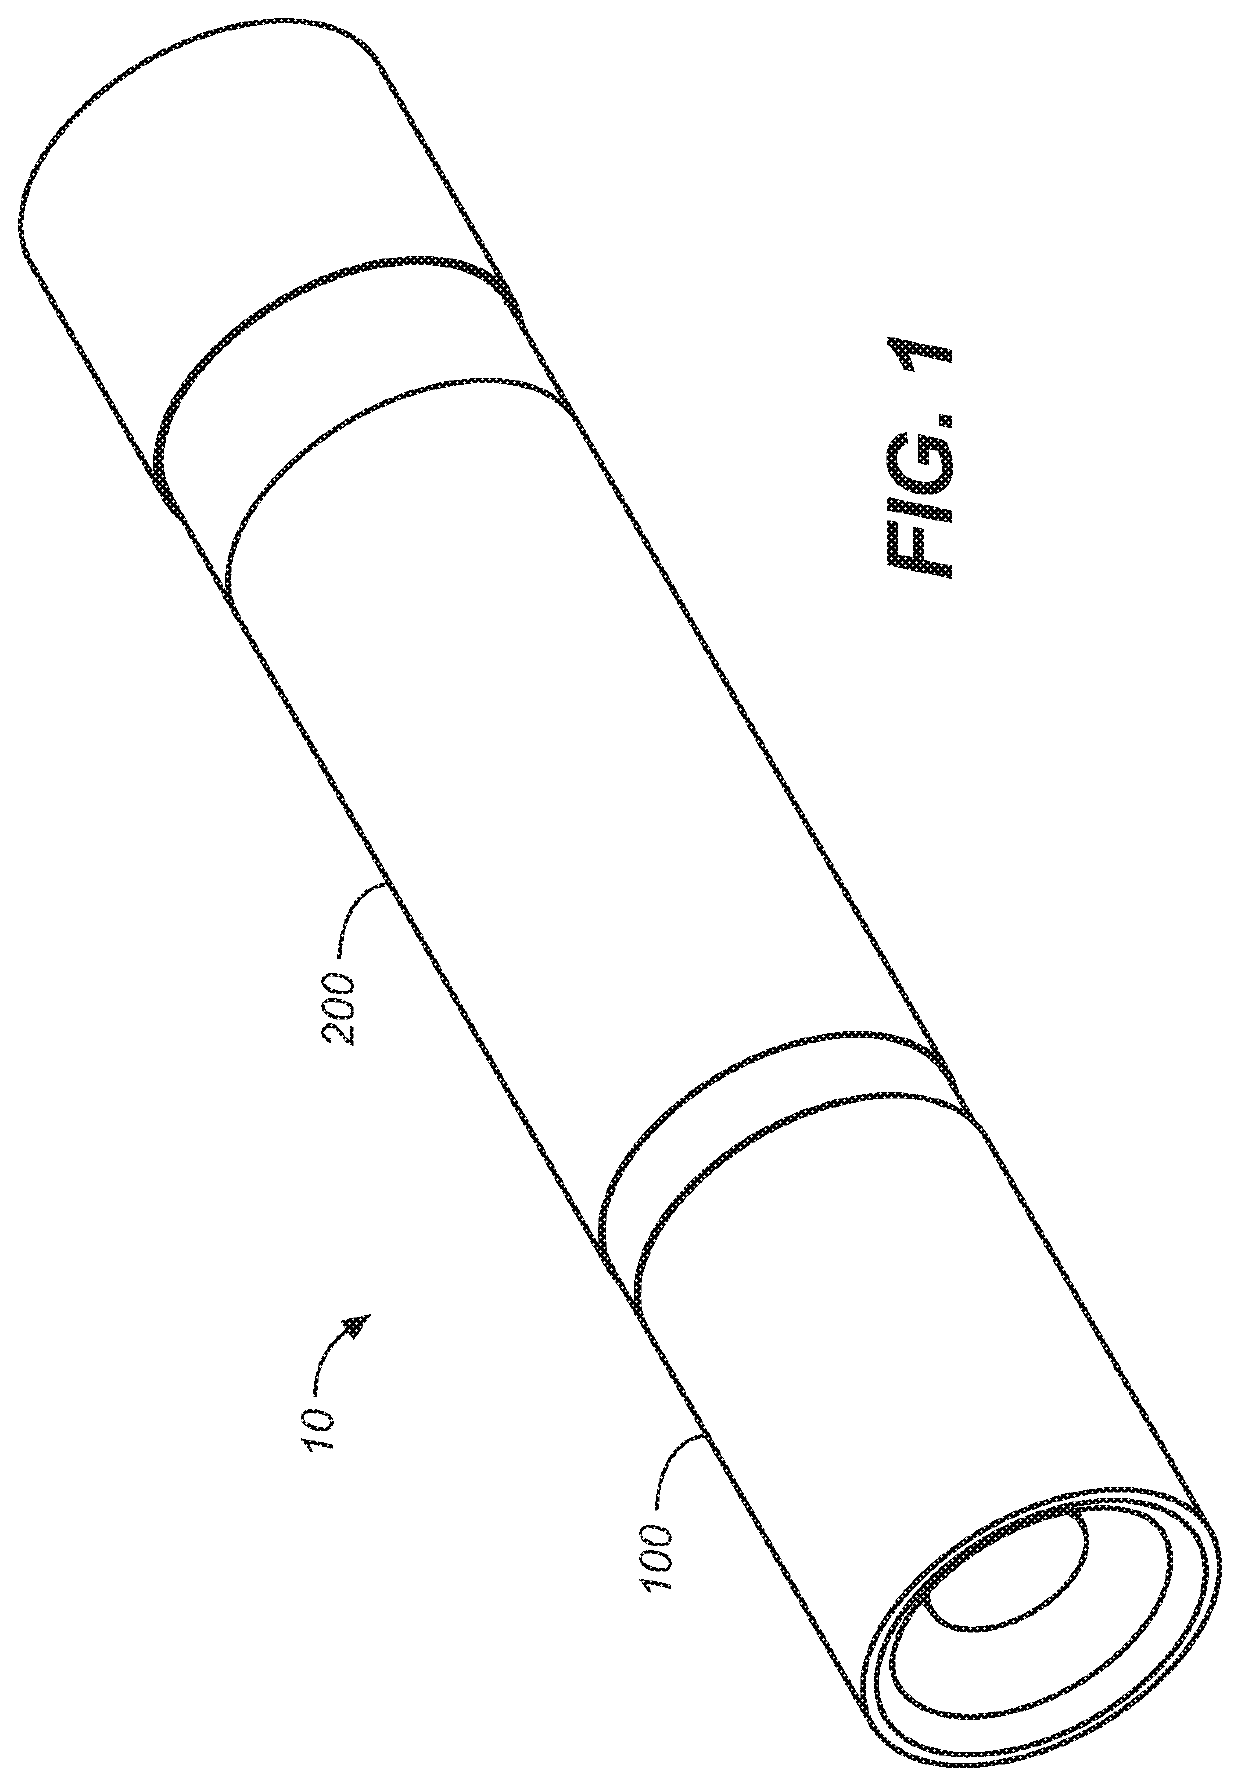 Linear electrical connector with helically distributed terminations